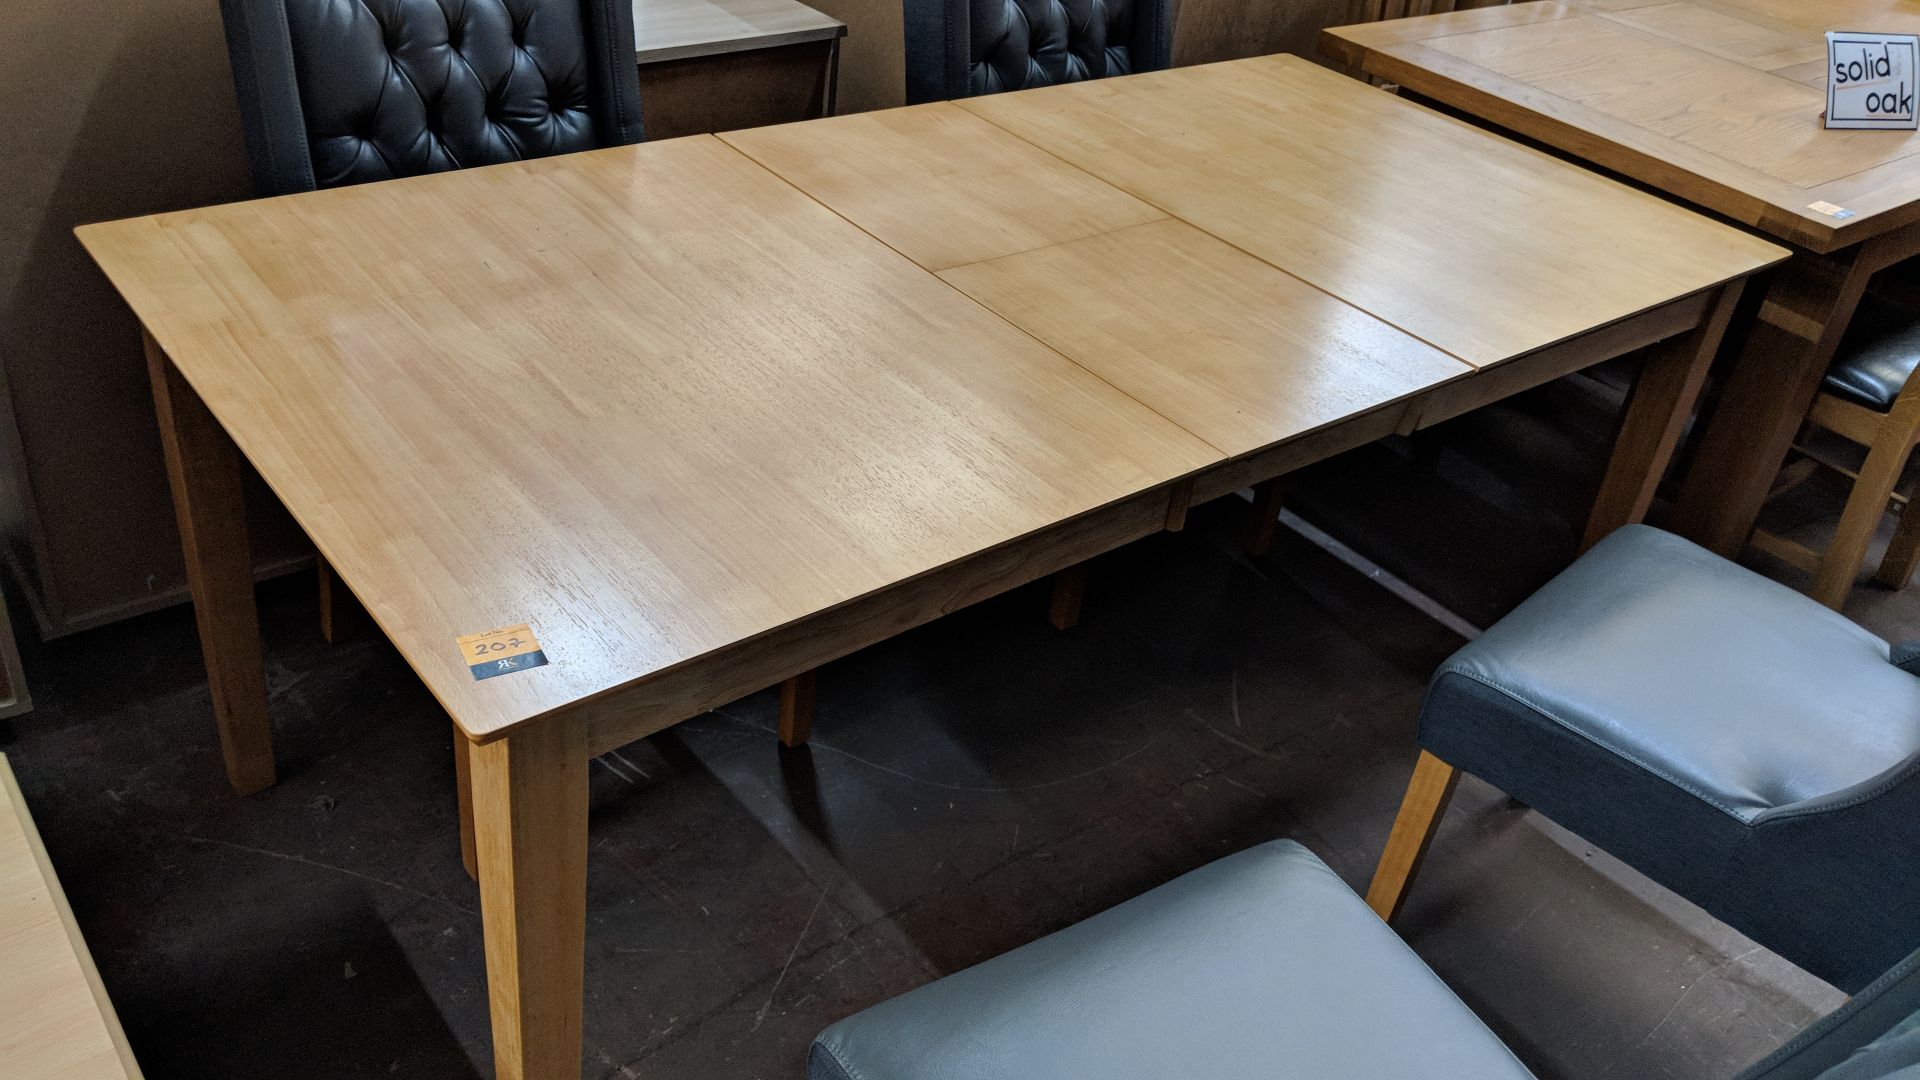 Extending dining table, circa 1500mm x 900mm extending to circa 1900mm x 900mm. NB chairs pictured - Image 4 of 4